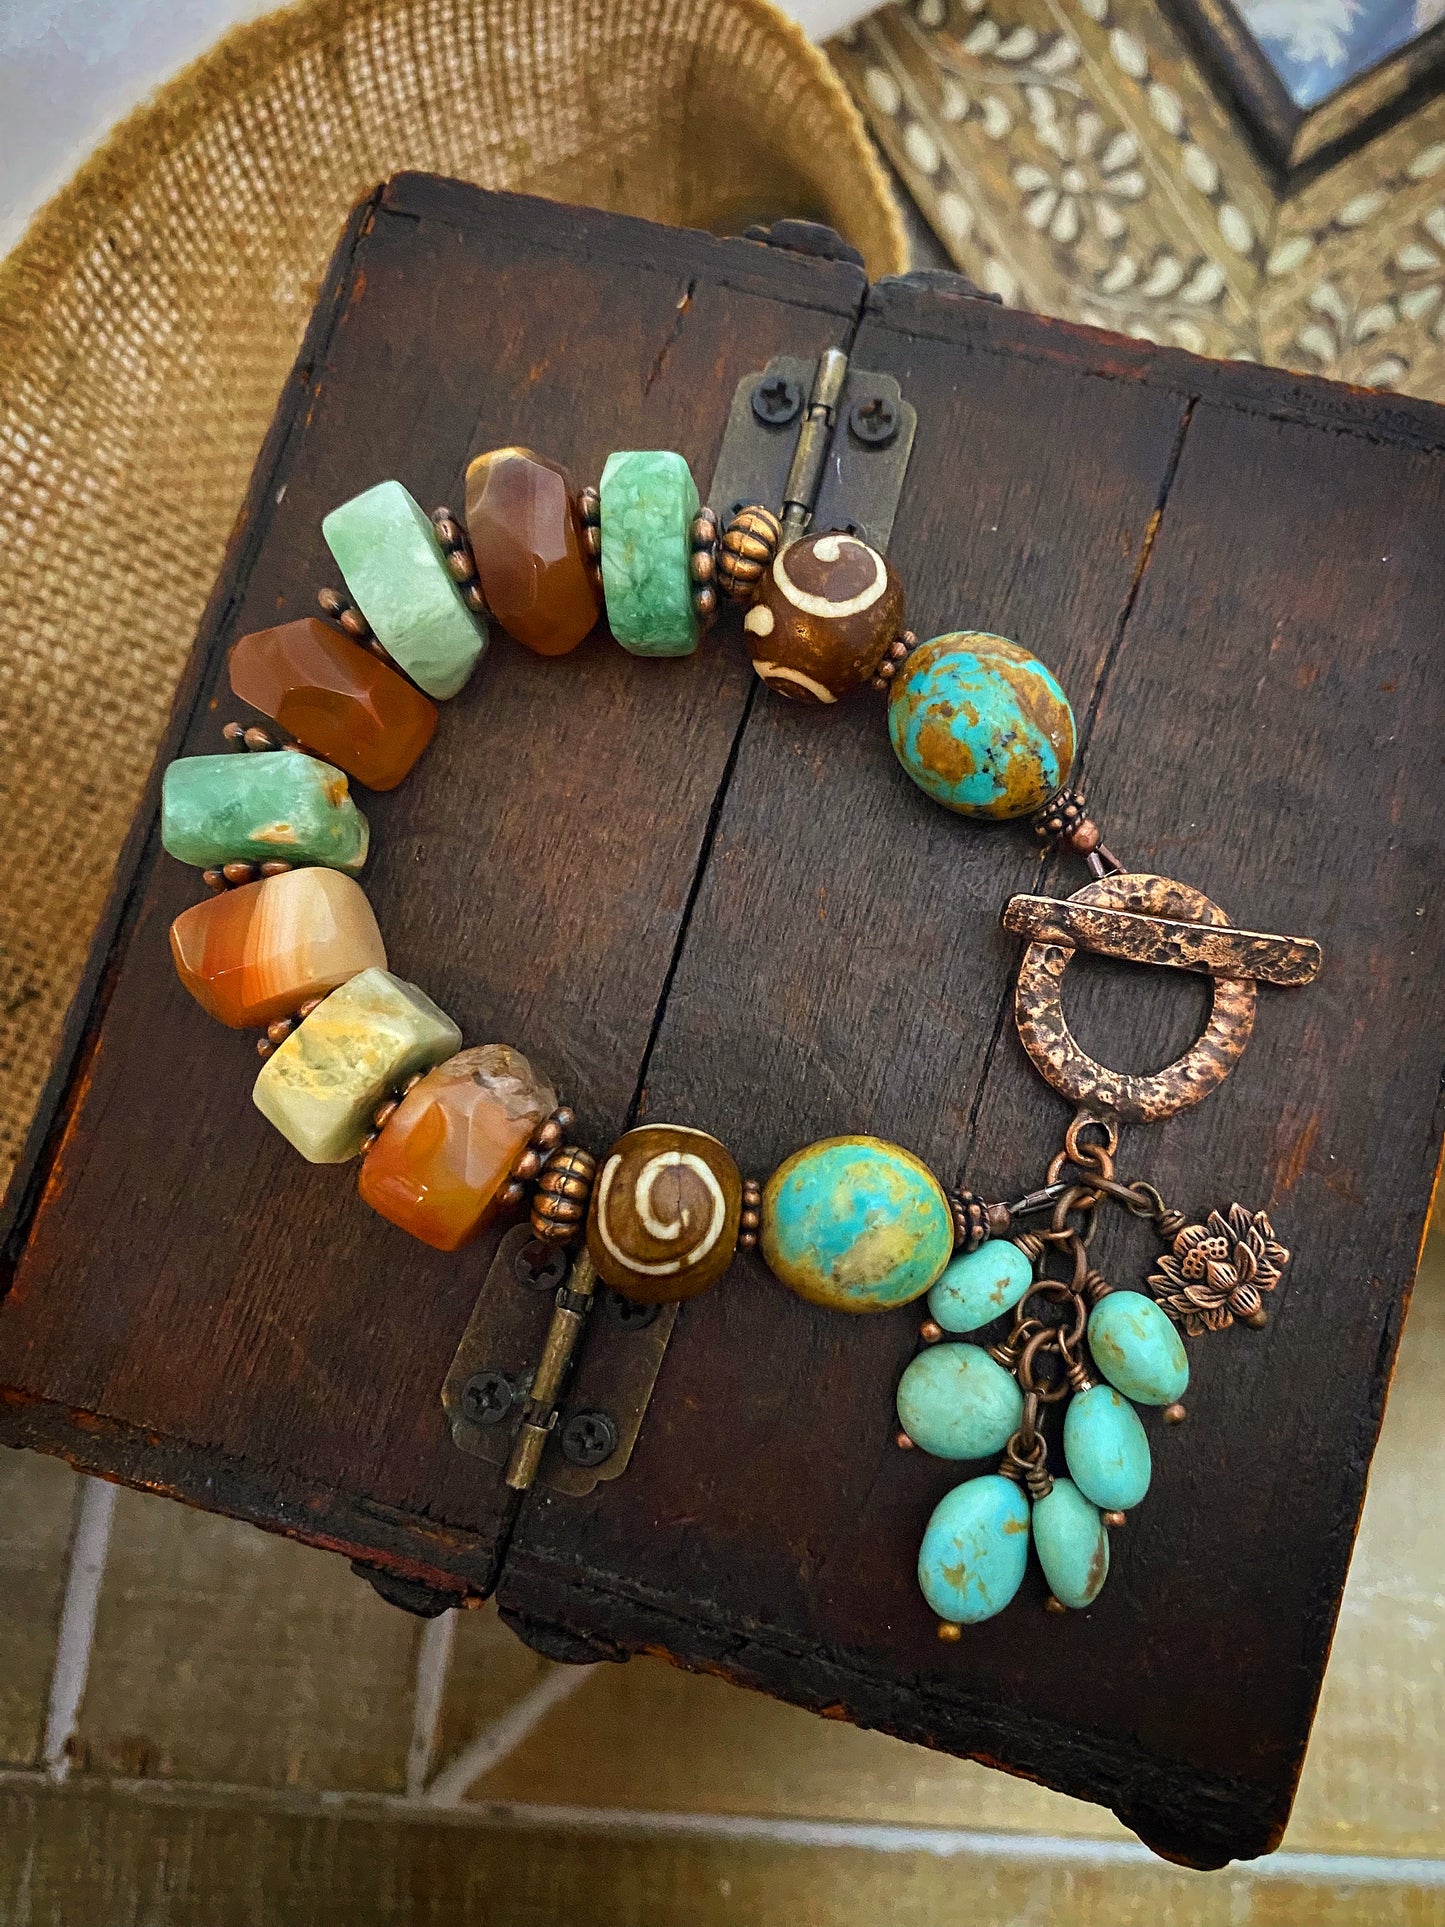 Genuine turquoise stone, Chrysophase stones, carnelian agate stones, African wood beads, copper metal, bracelet